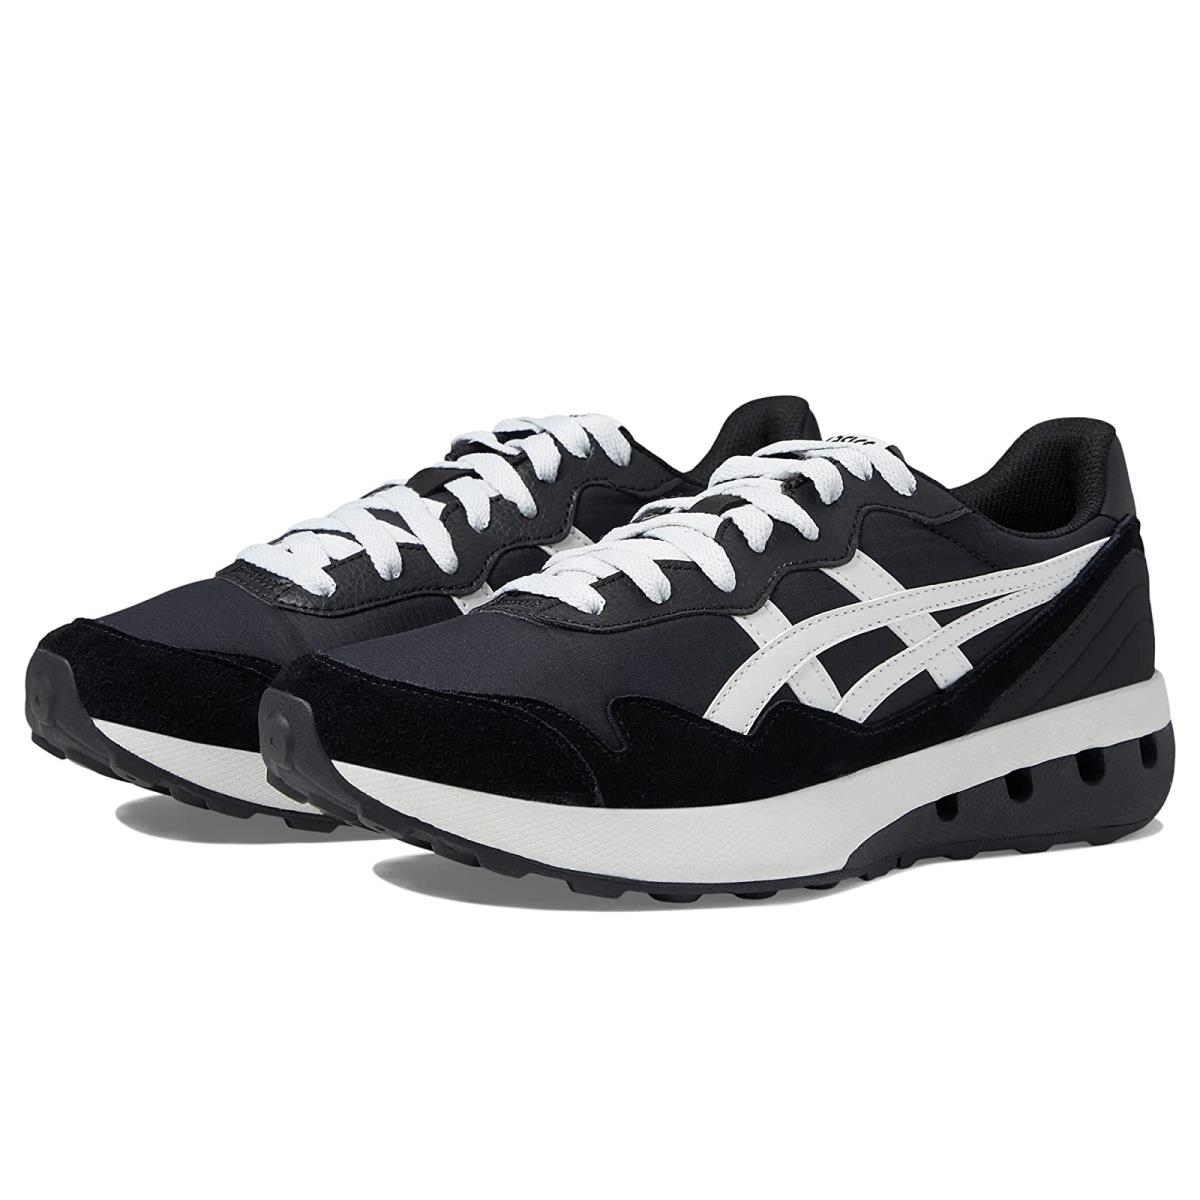 Man`s Sneakers Athletic Shoes Asics Sportstyle Jogger X81 Black/Glacier Grey